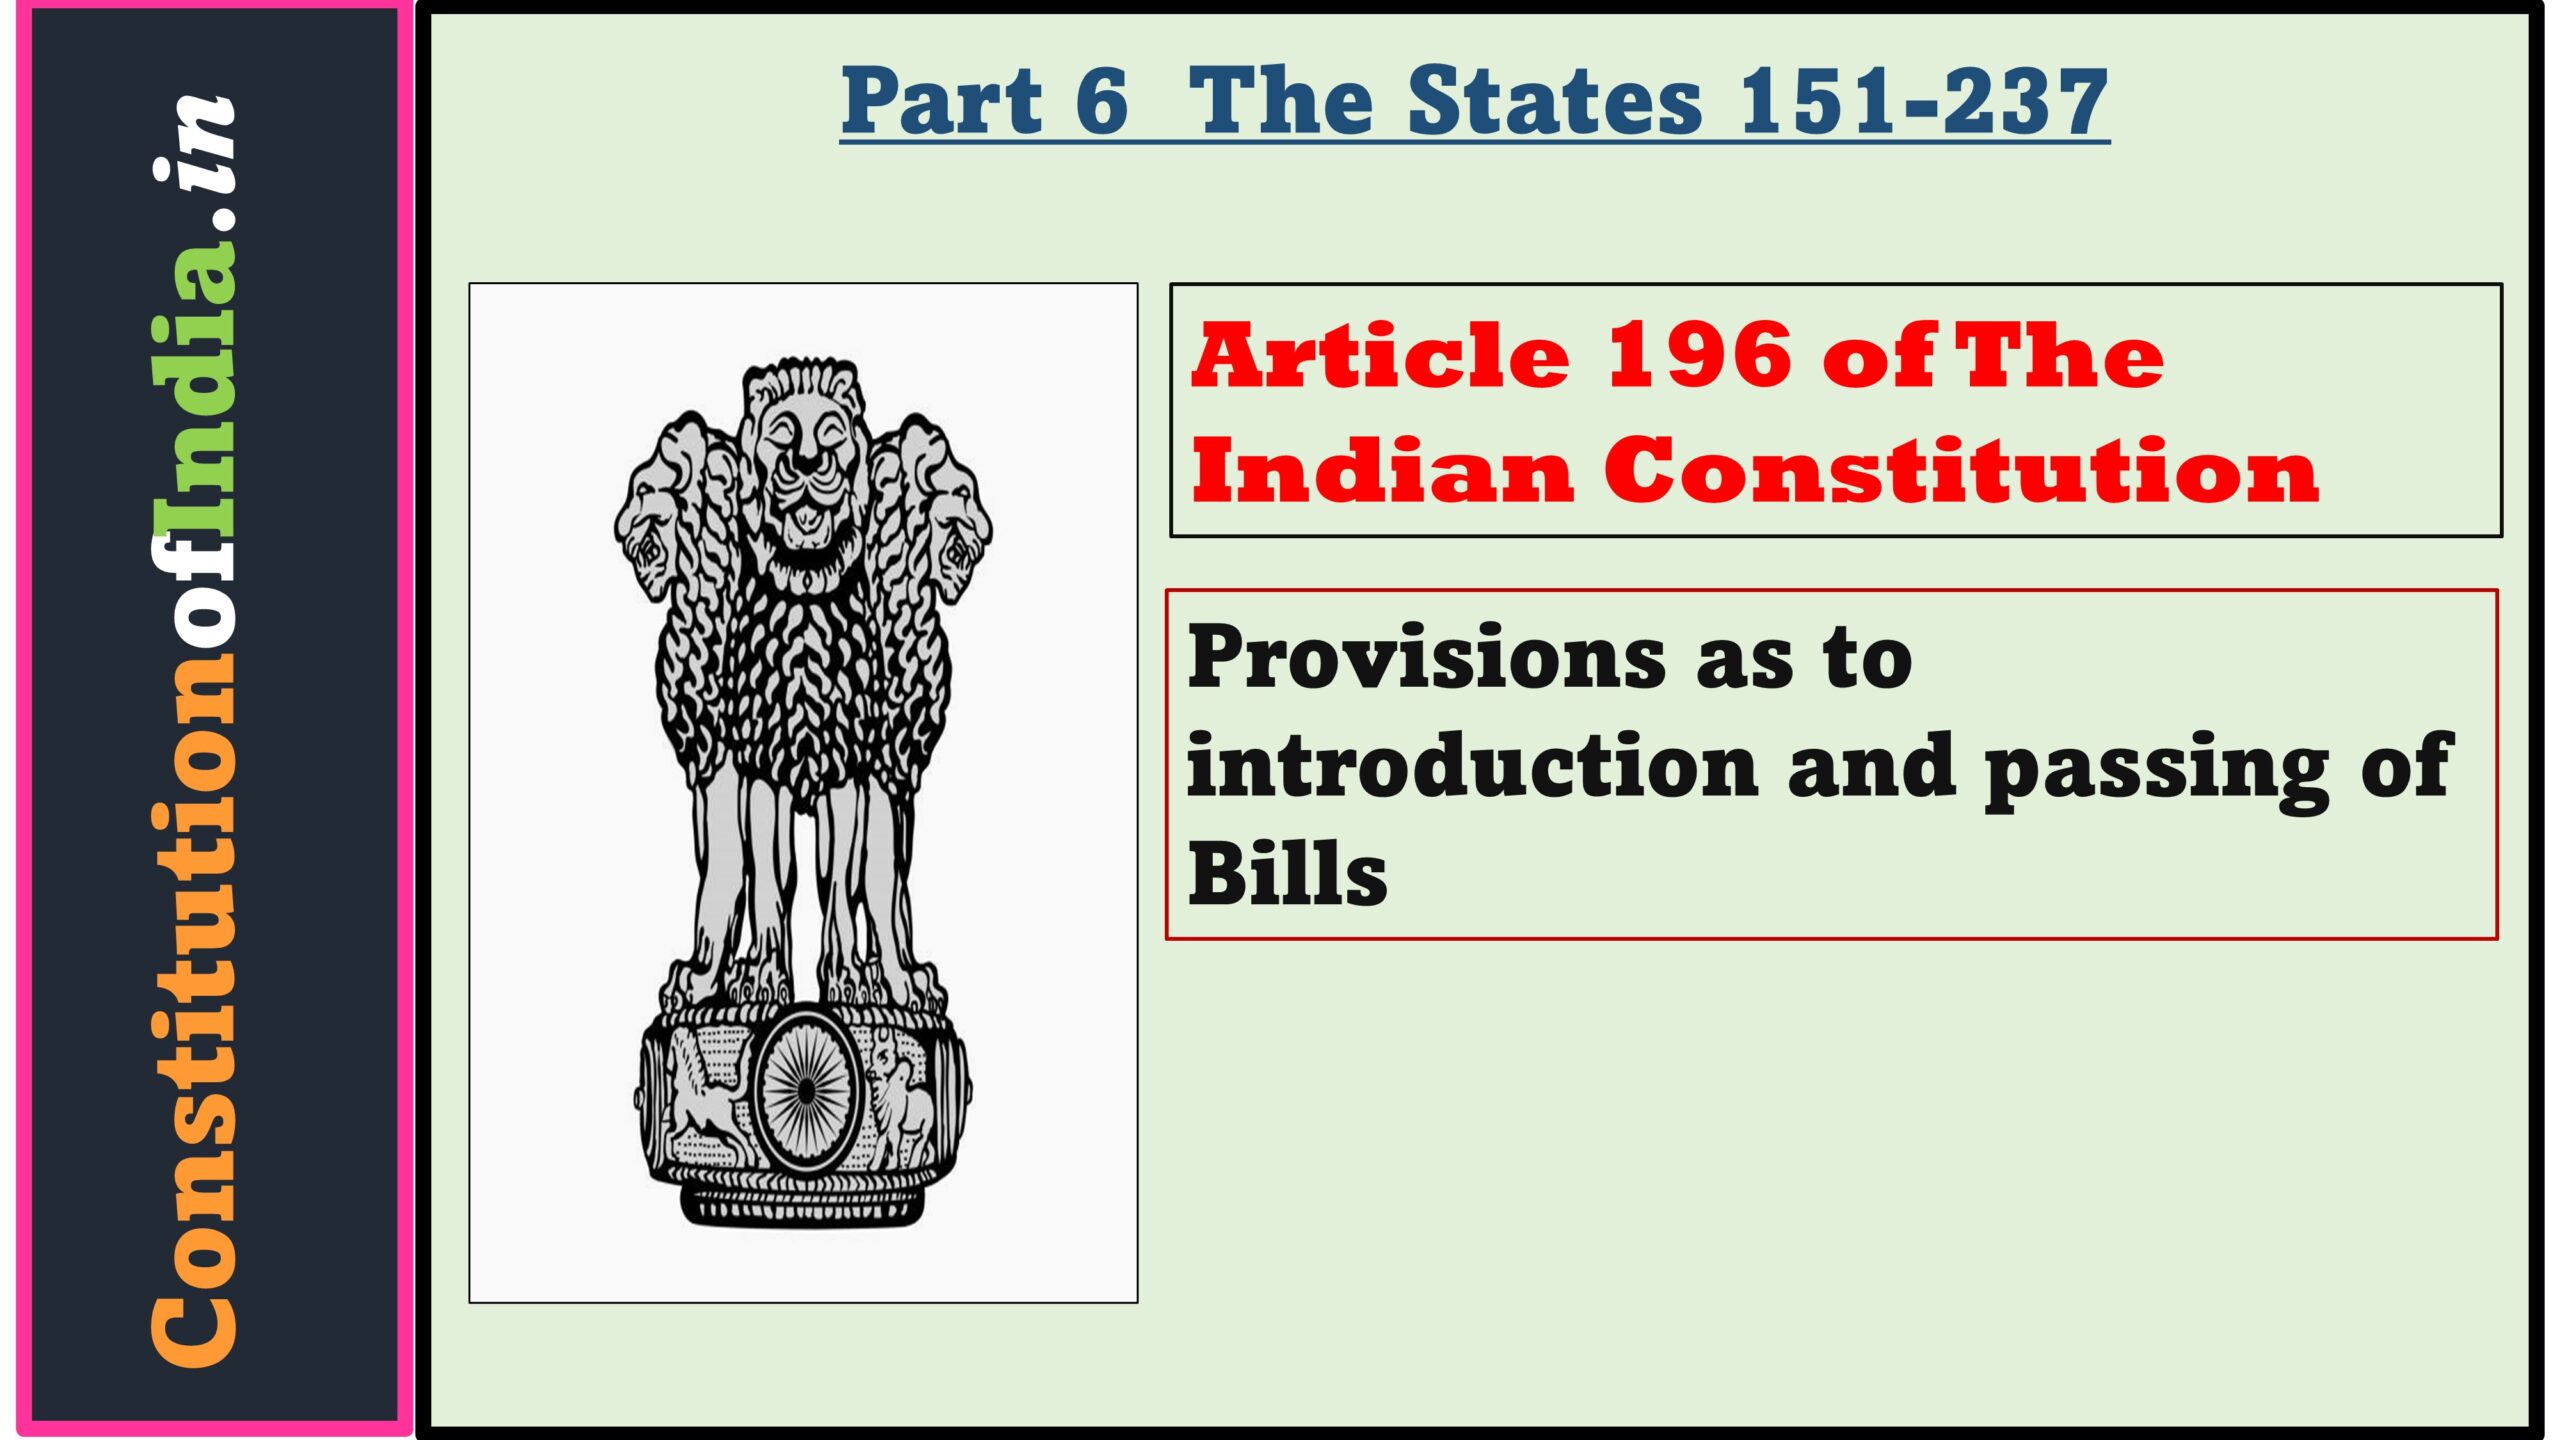 Article 196 of The Indian Constitution